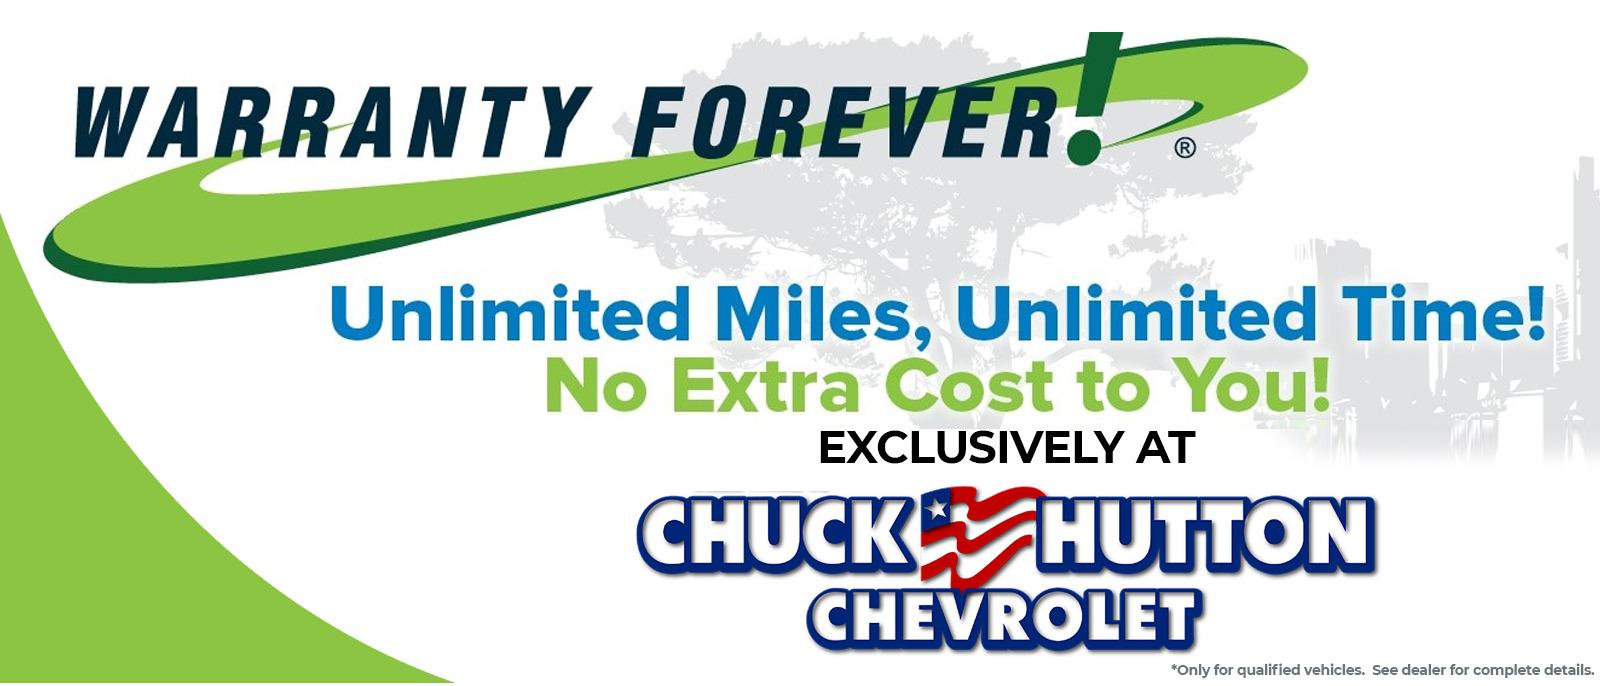 Warranty Forever at Chuck Hutton Chevrolet